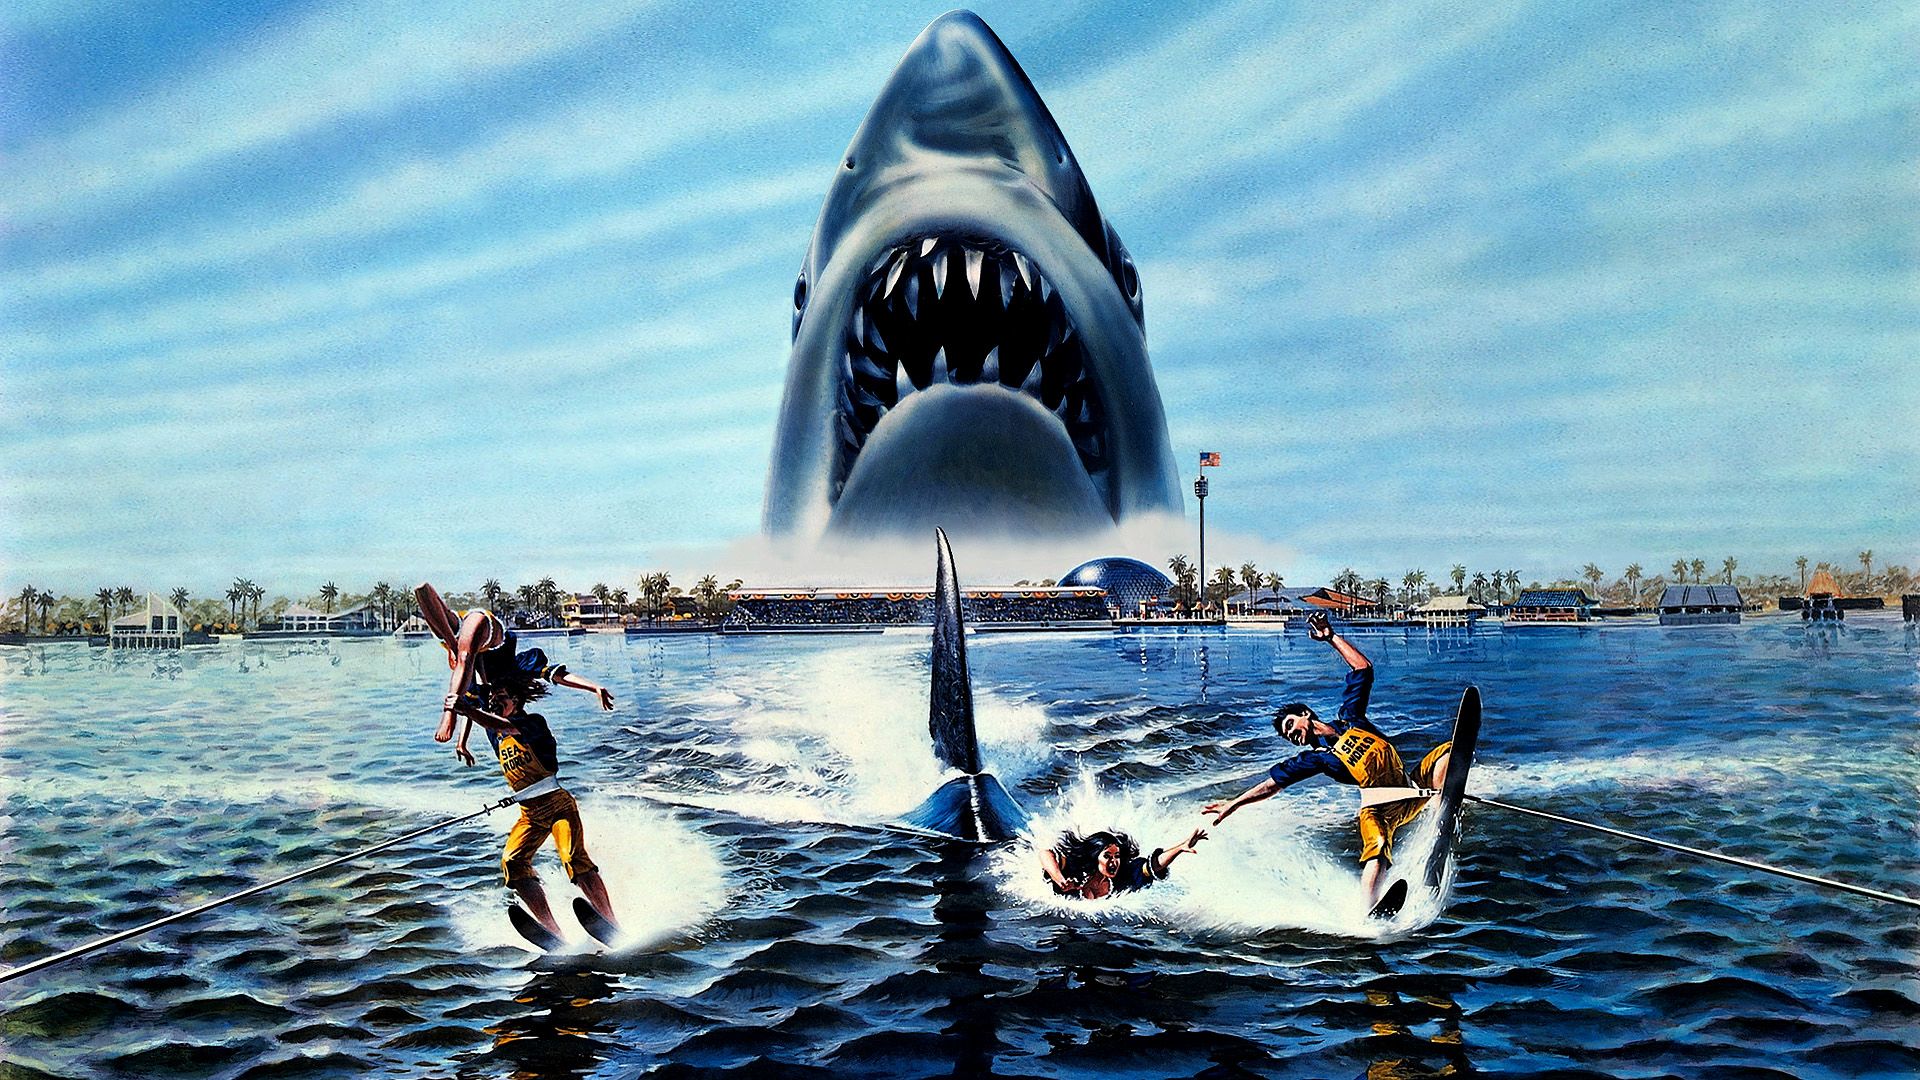 Jaws 3-D background